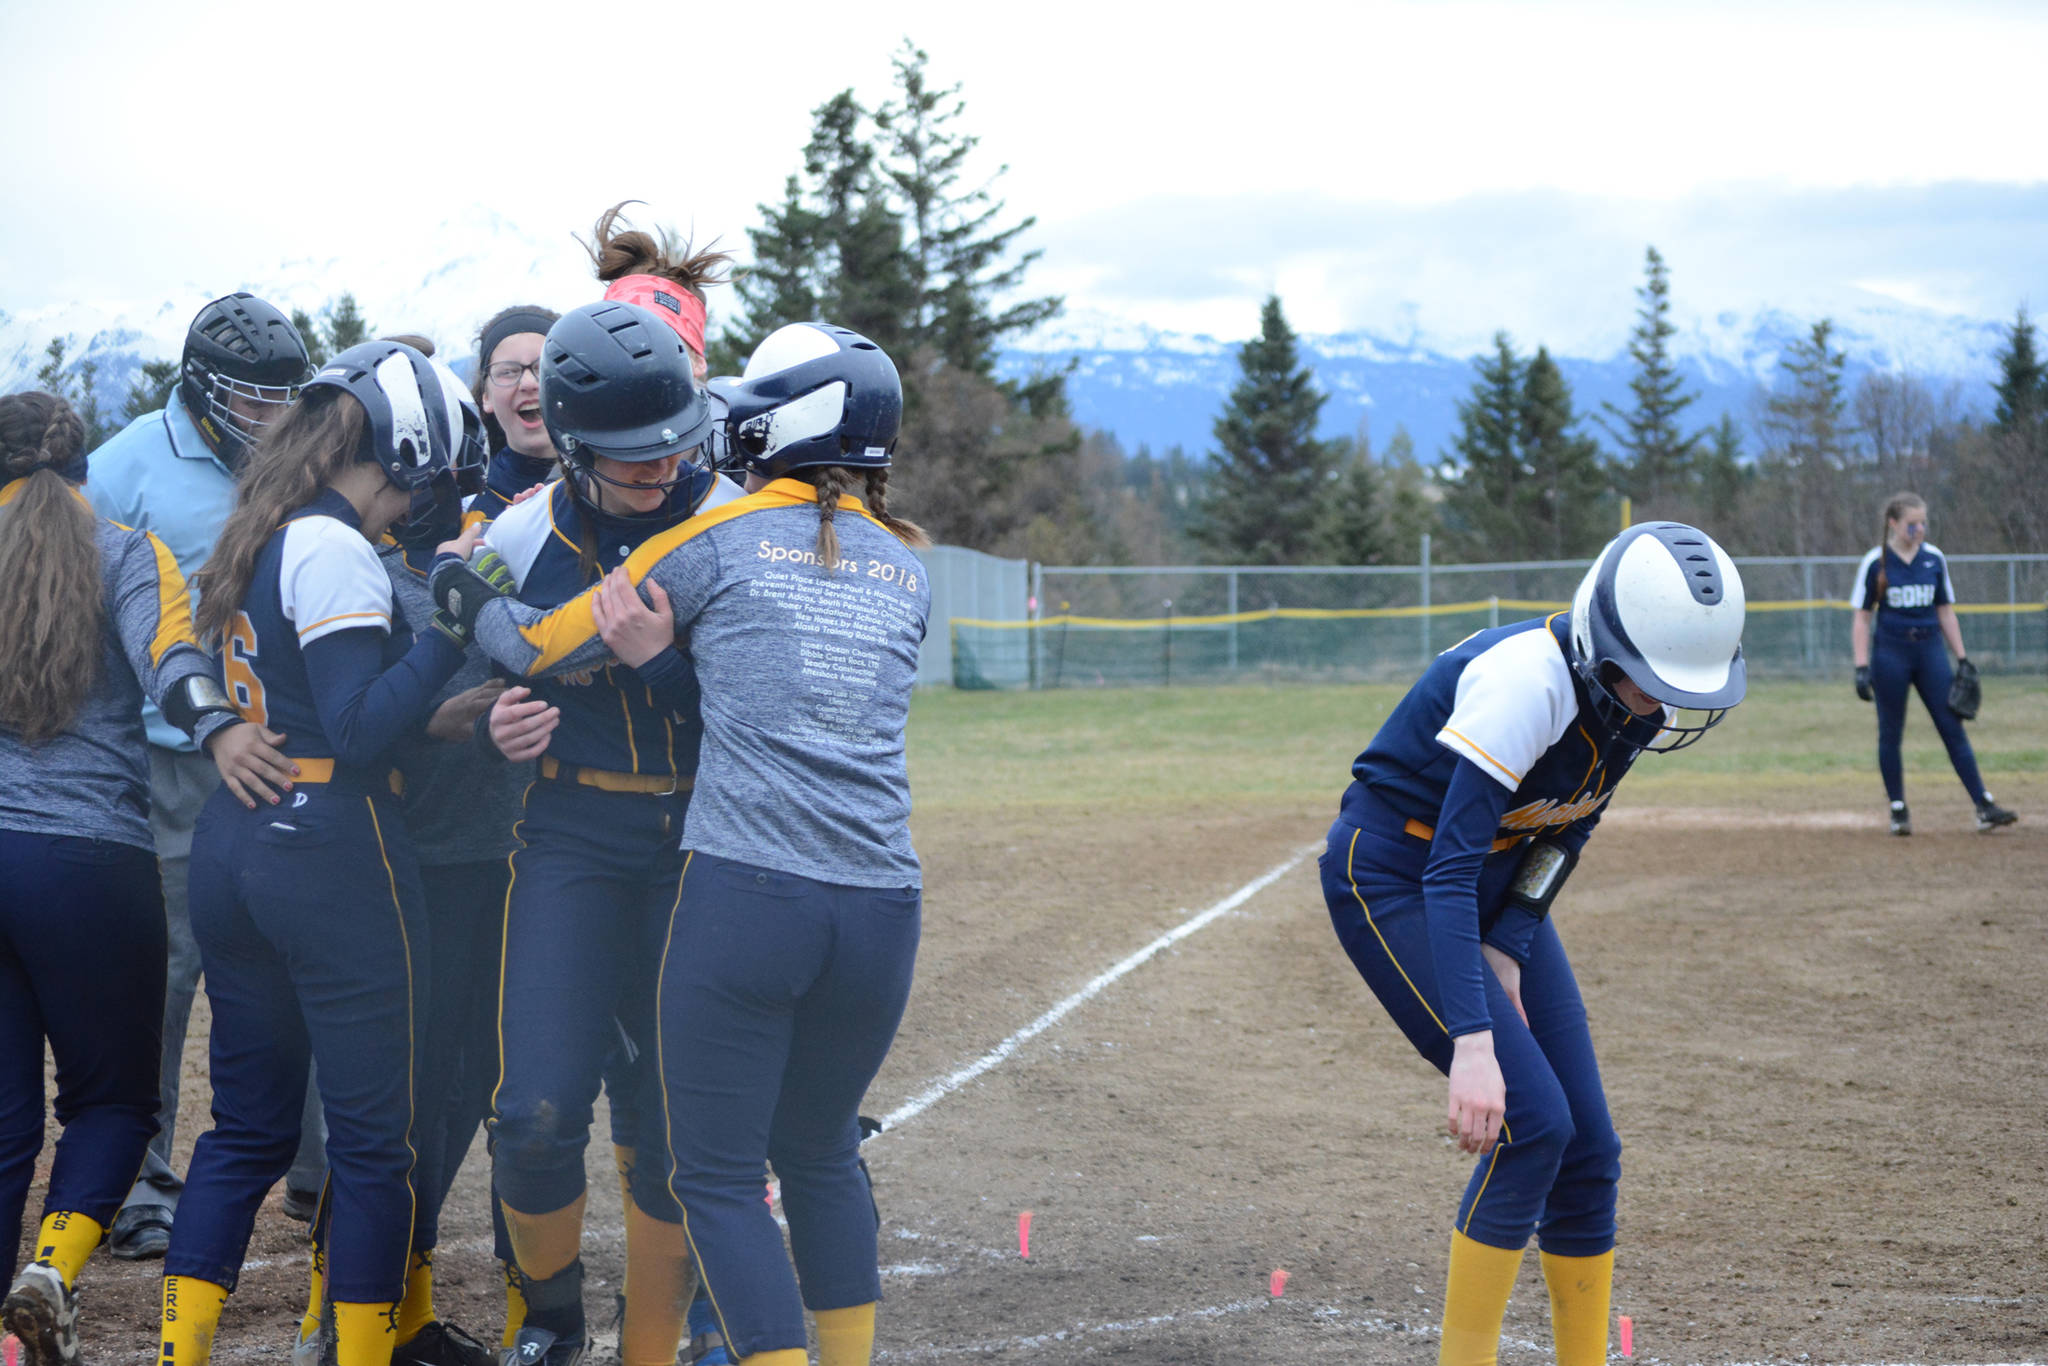 Homer High School Mariners softball batter Grace Godfrey gets a hug from her teammates after she hit a home run on Tuesday, April 30, 2019, against Soldotna High School at Jack Gist Park in Homer, Alaska. (Photo by Michael Armstrong/Homer News)